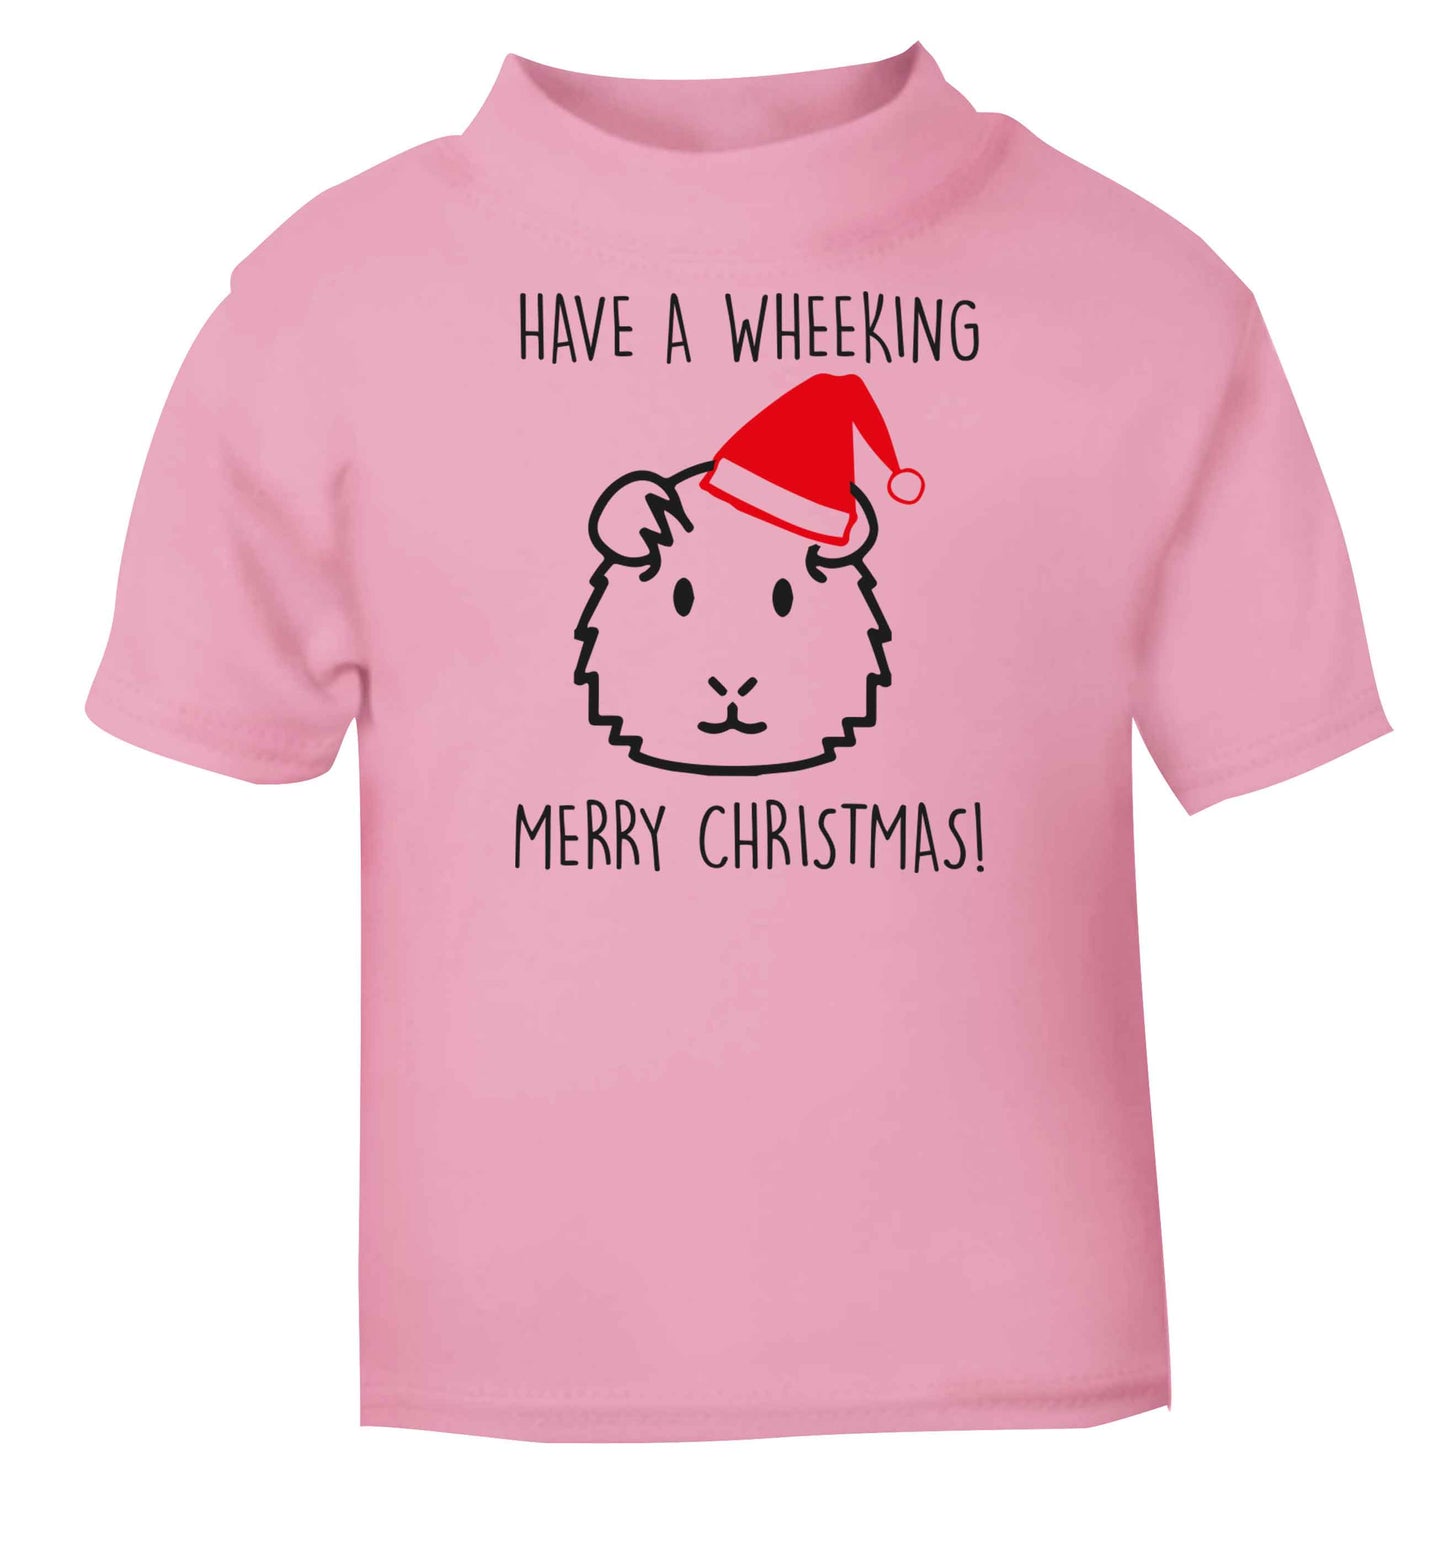 Have a wheeking merry Christmas light pink baby toddler Tshirt 2 Years